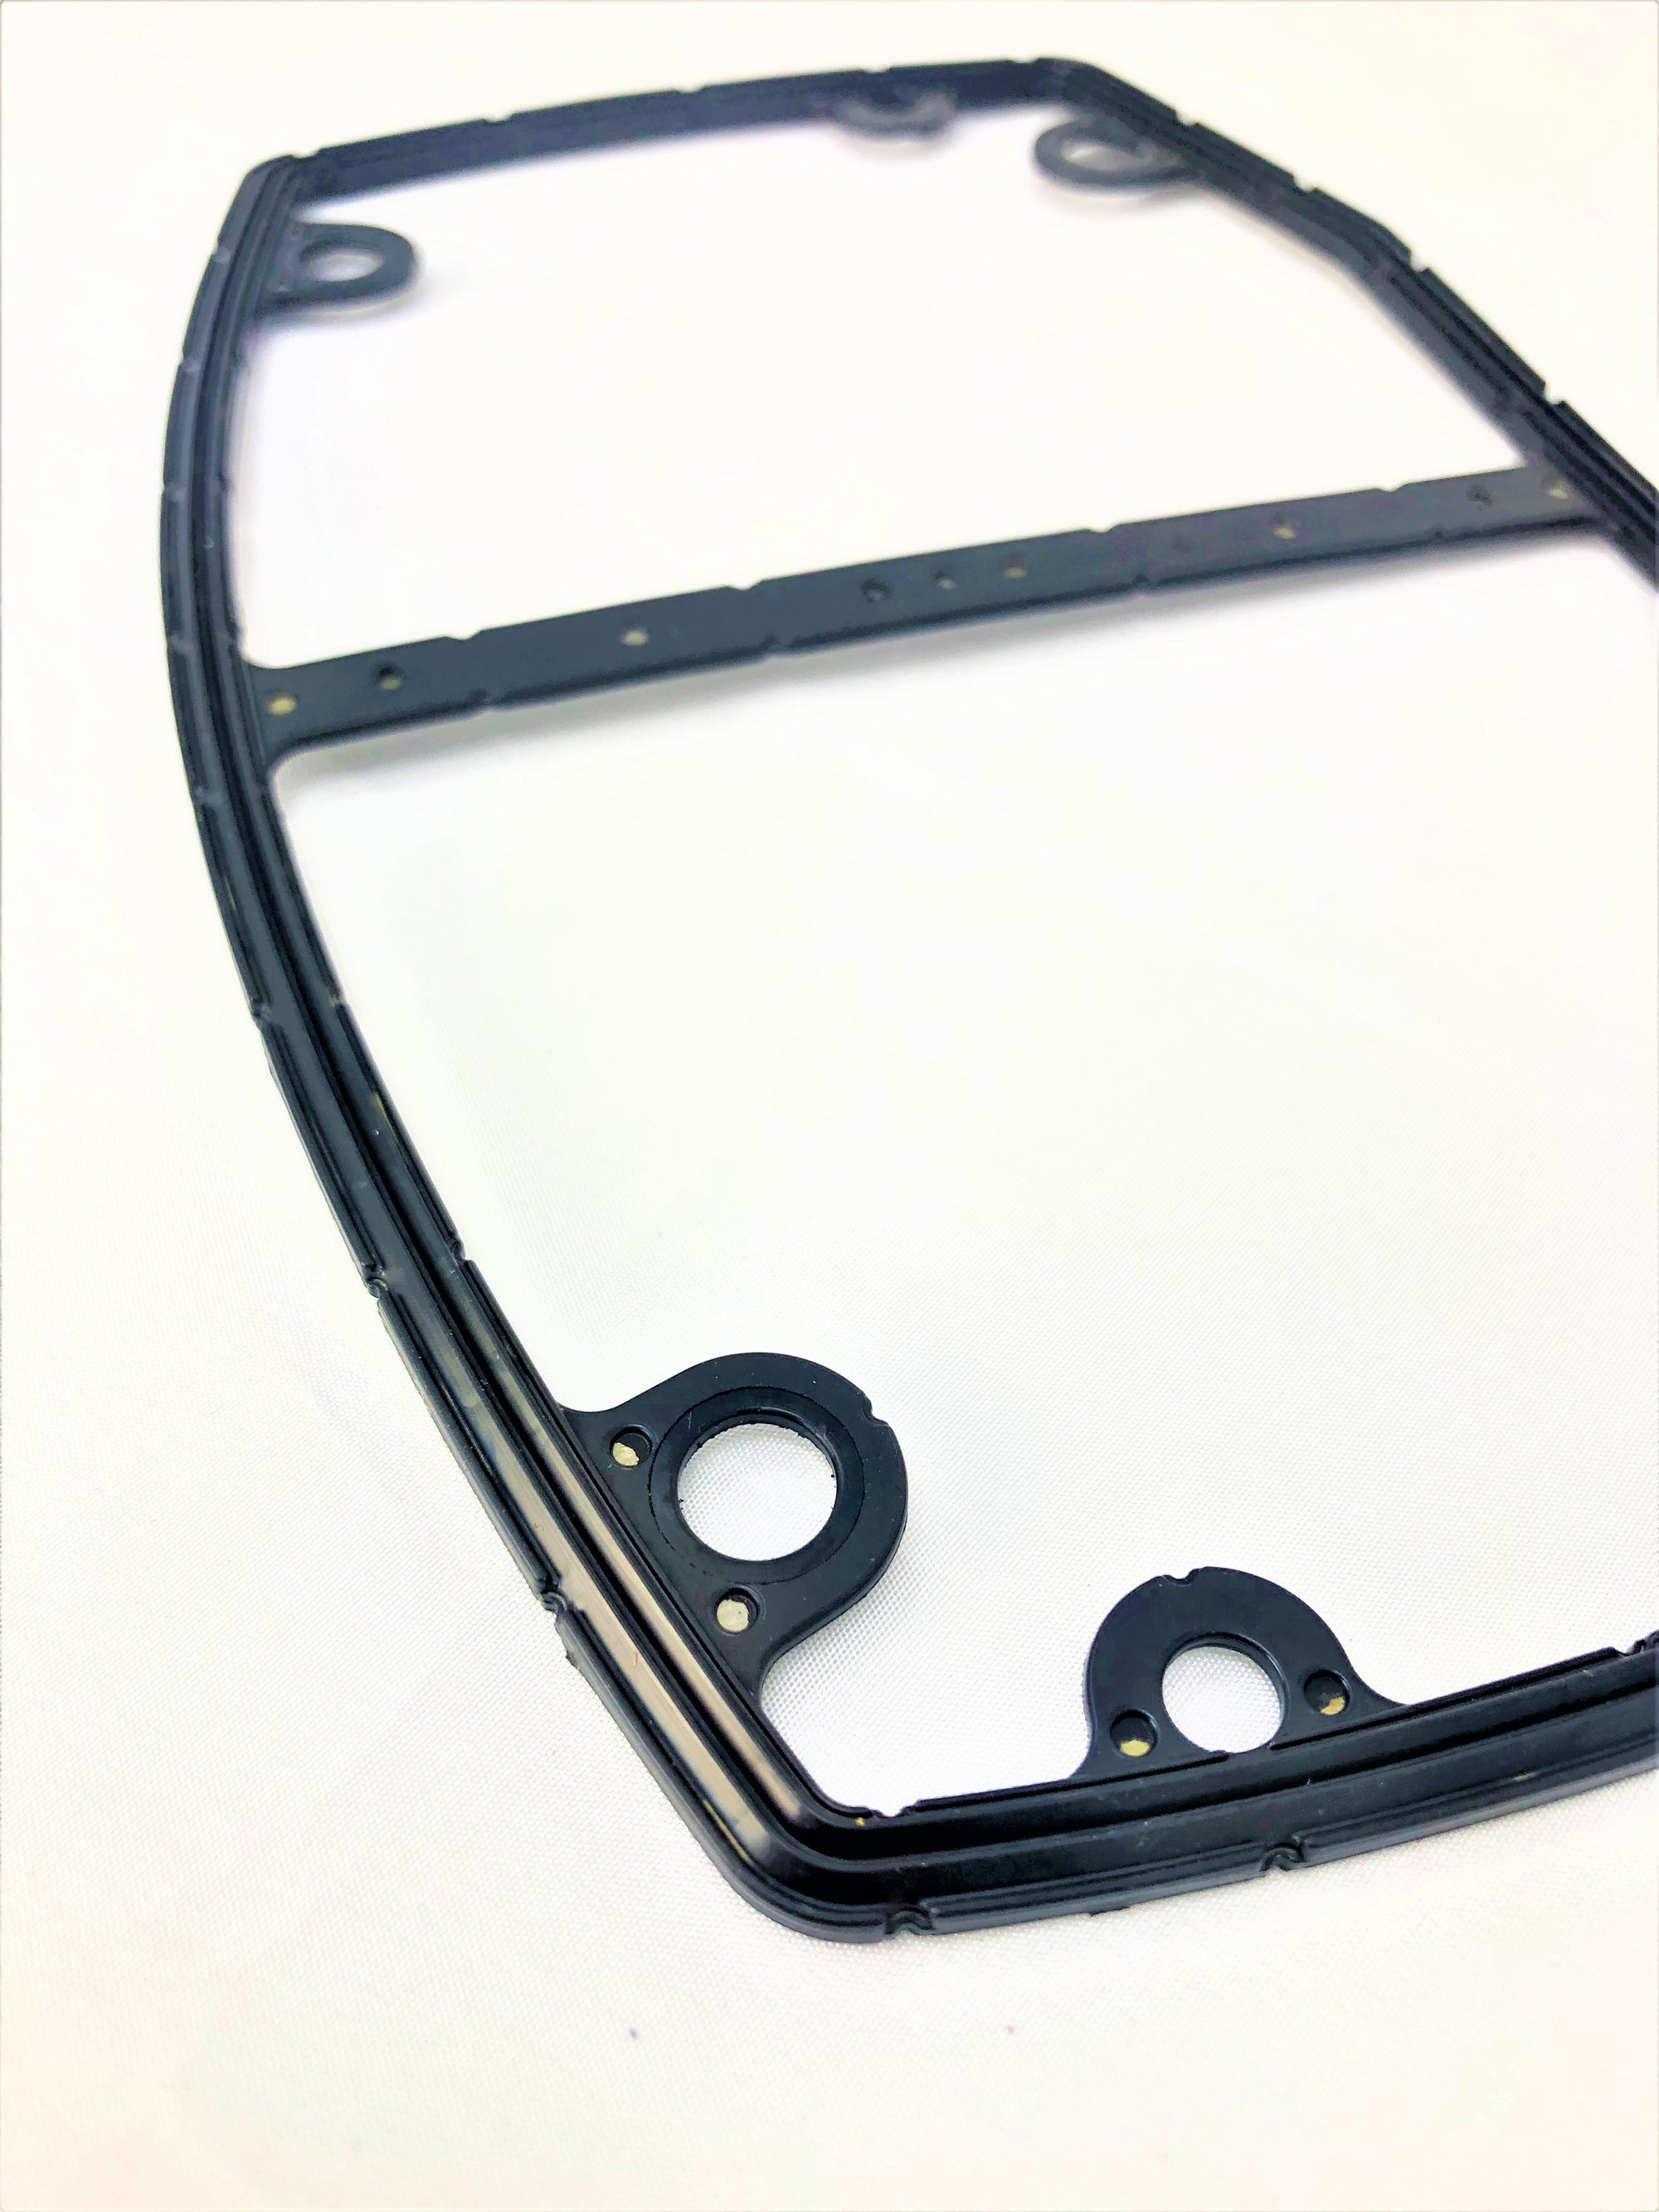 NEW FOR 2023! - Reusable Reinforced Rubber Cylinder Head Cover Gasket 2019-Present